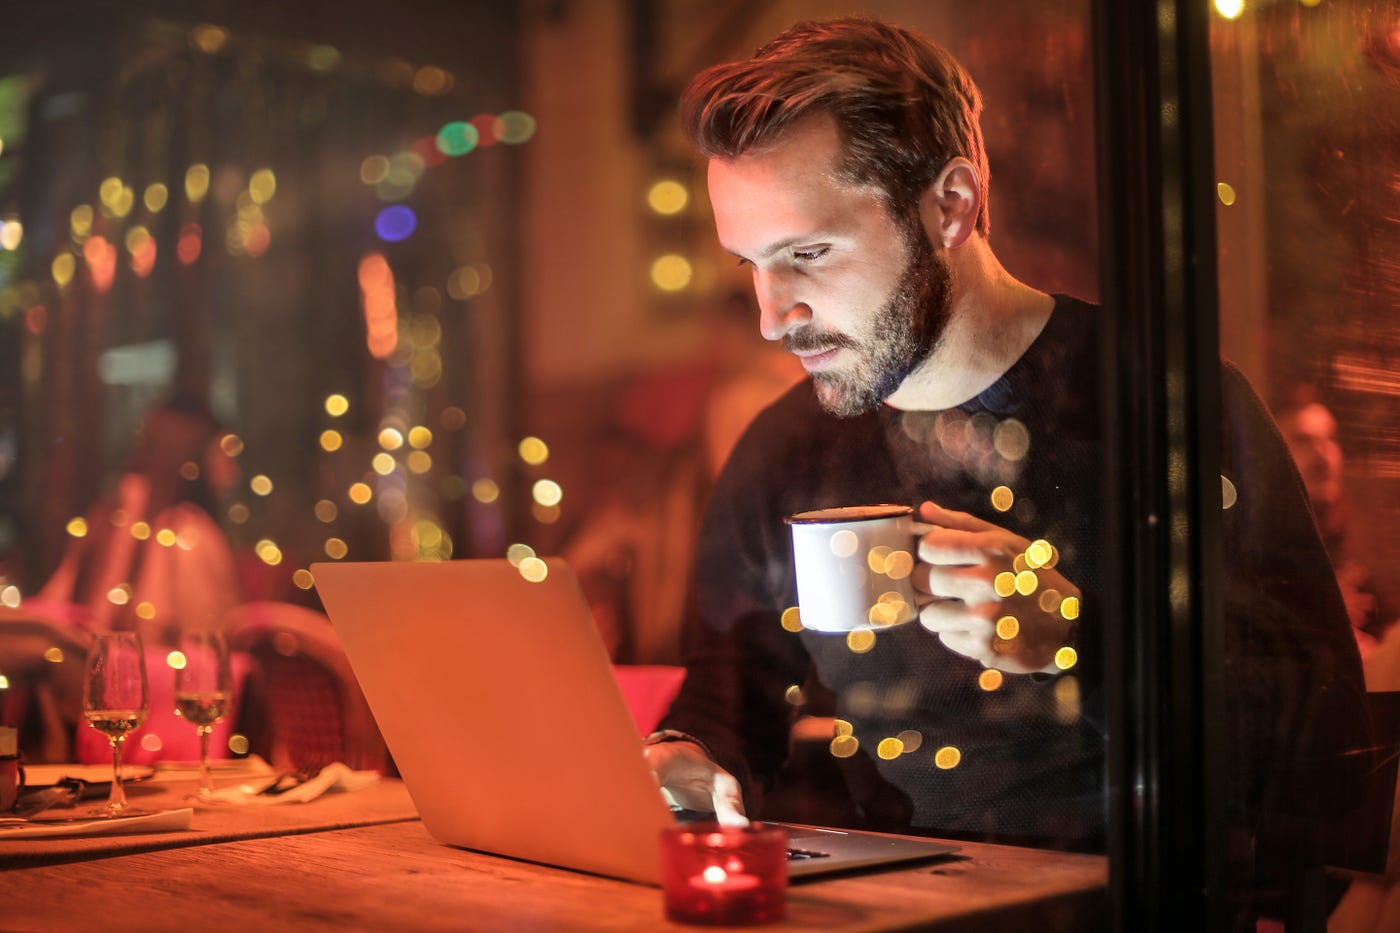 A man working on a laptop while holding a cup of coffee.